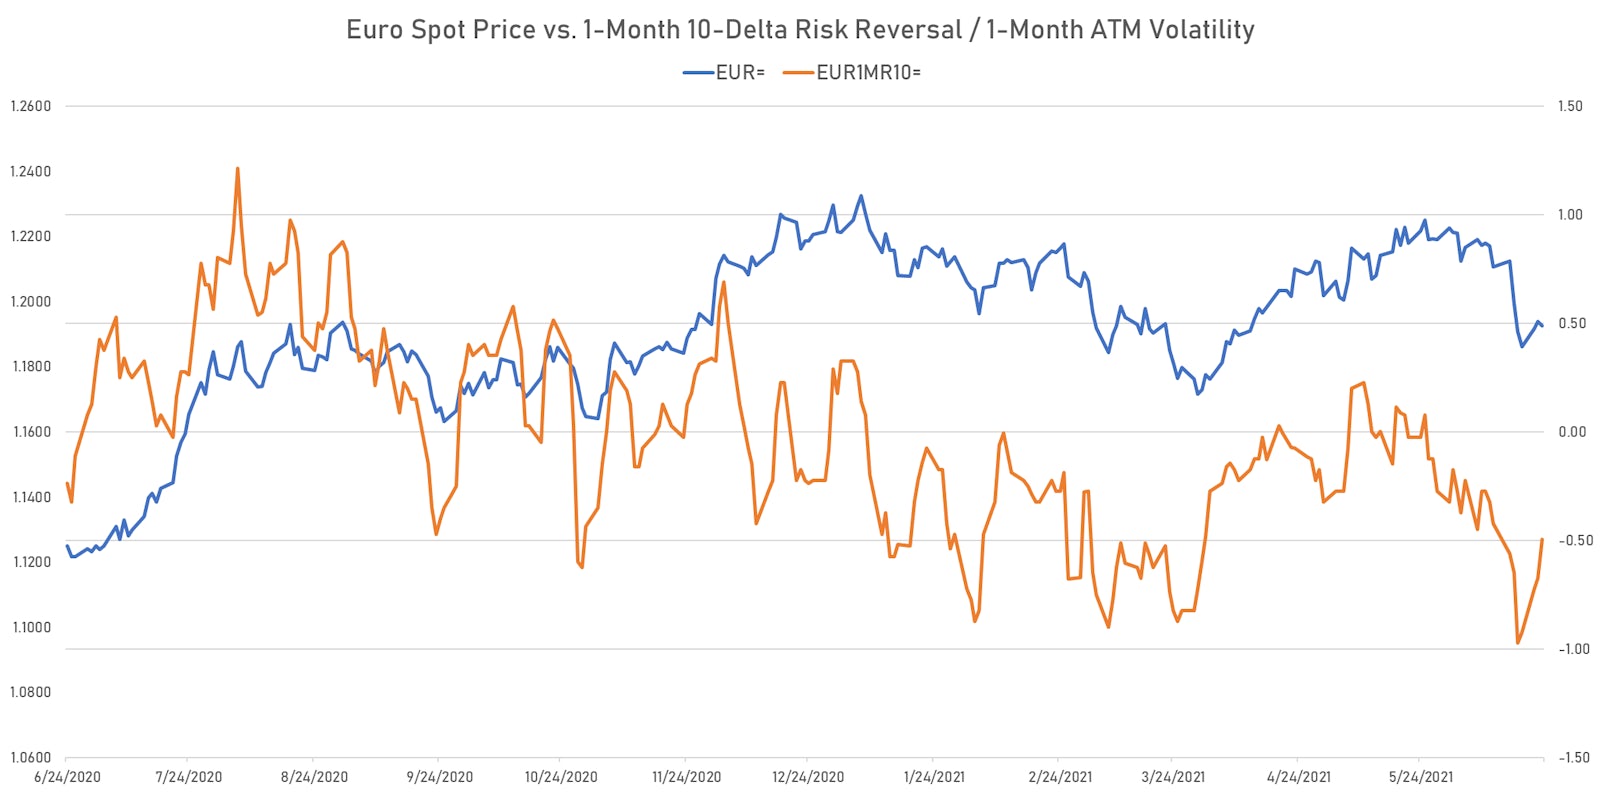 1-month 10-delta risk reversals showing the euro positioning coming closer to home | Sources: ϕpost, Refinitiv data